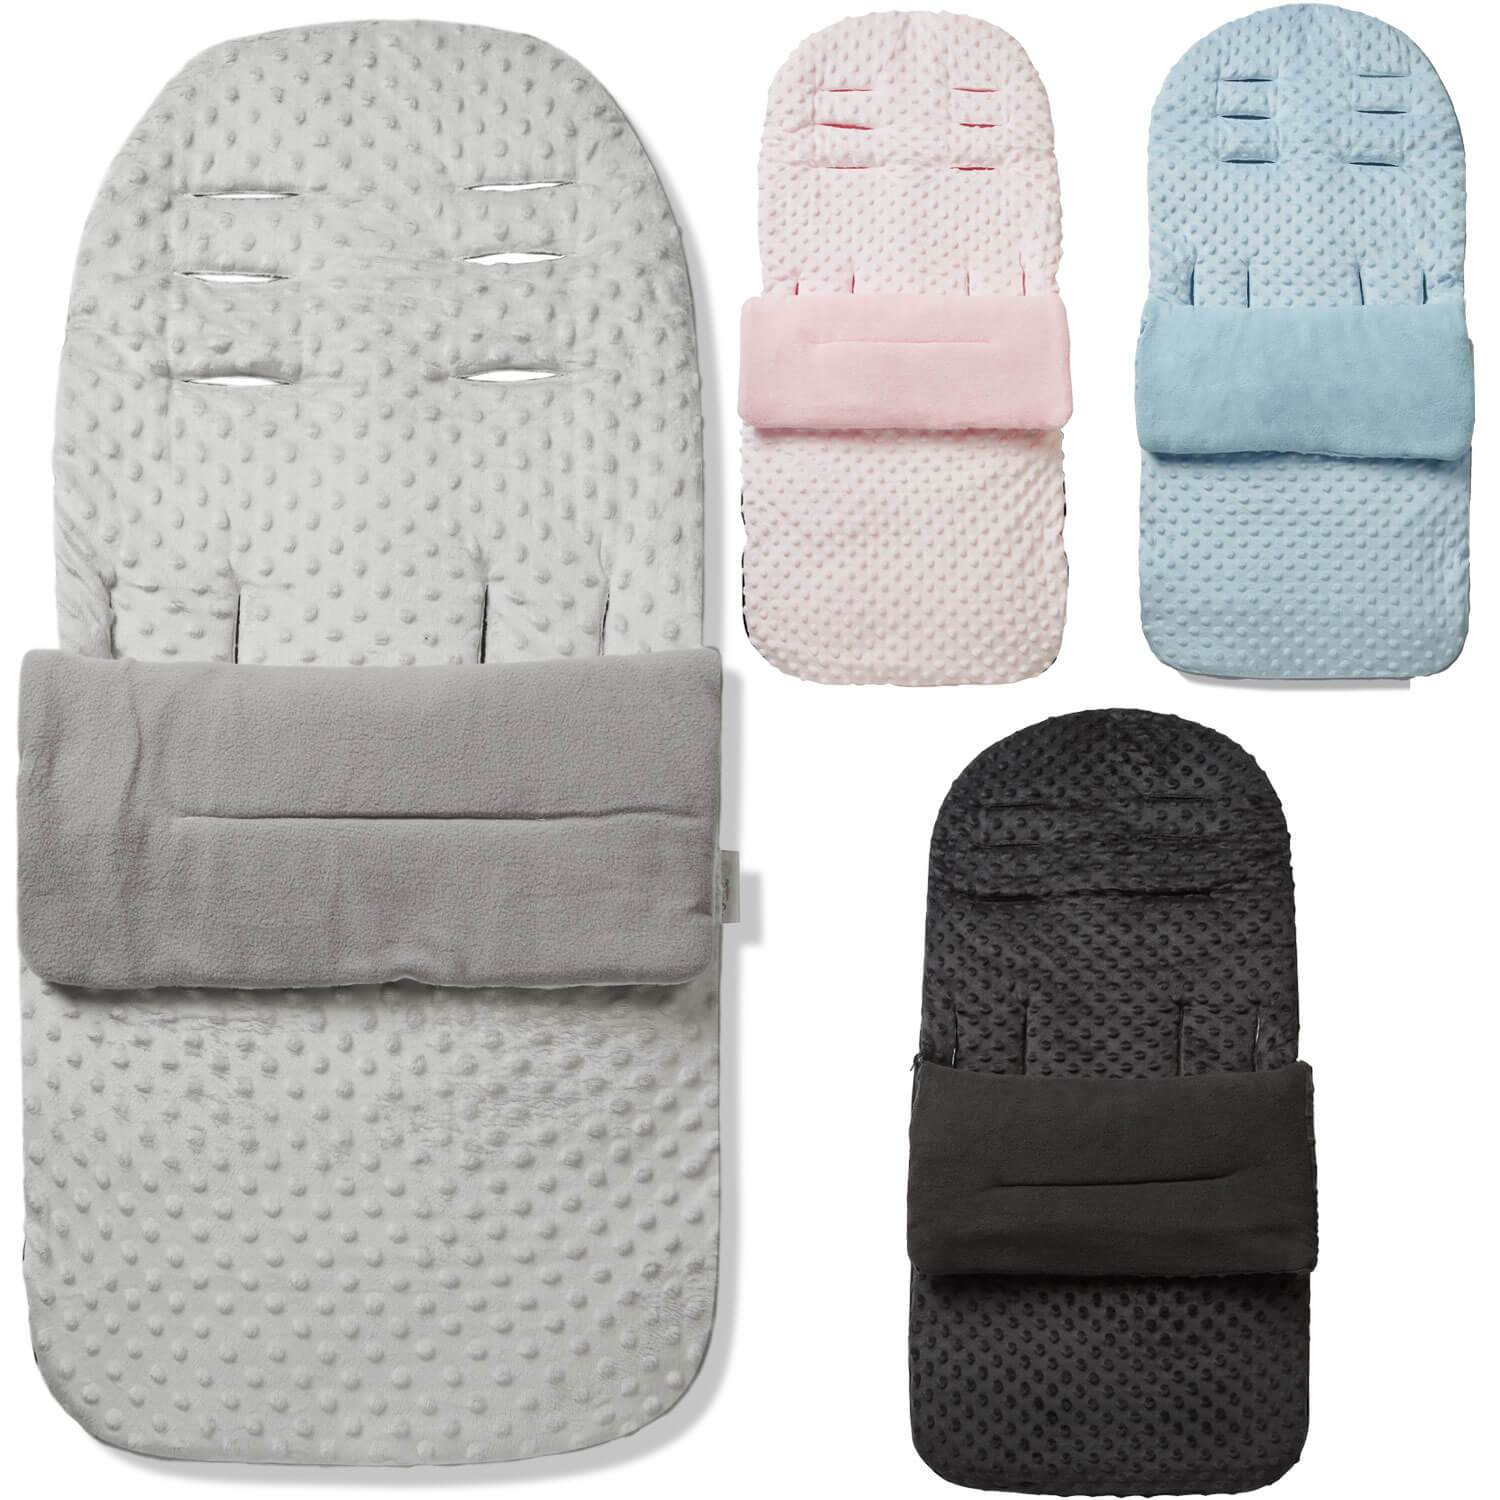 Dimple Footmuff / Cosy Toes Compatible with Baby Weavers - For Your Little One